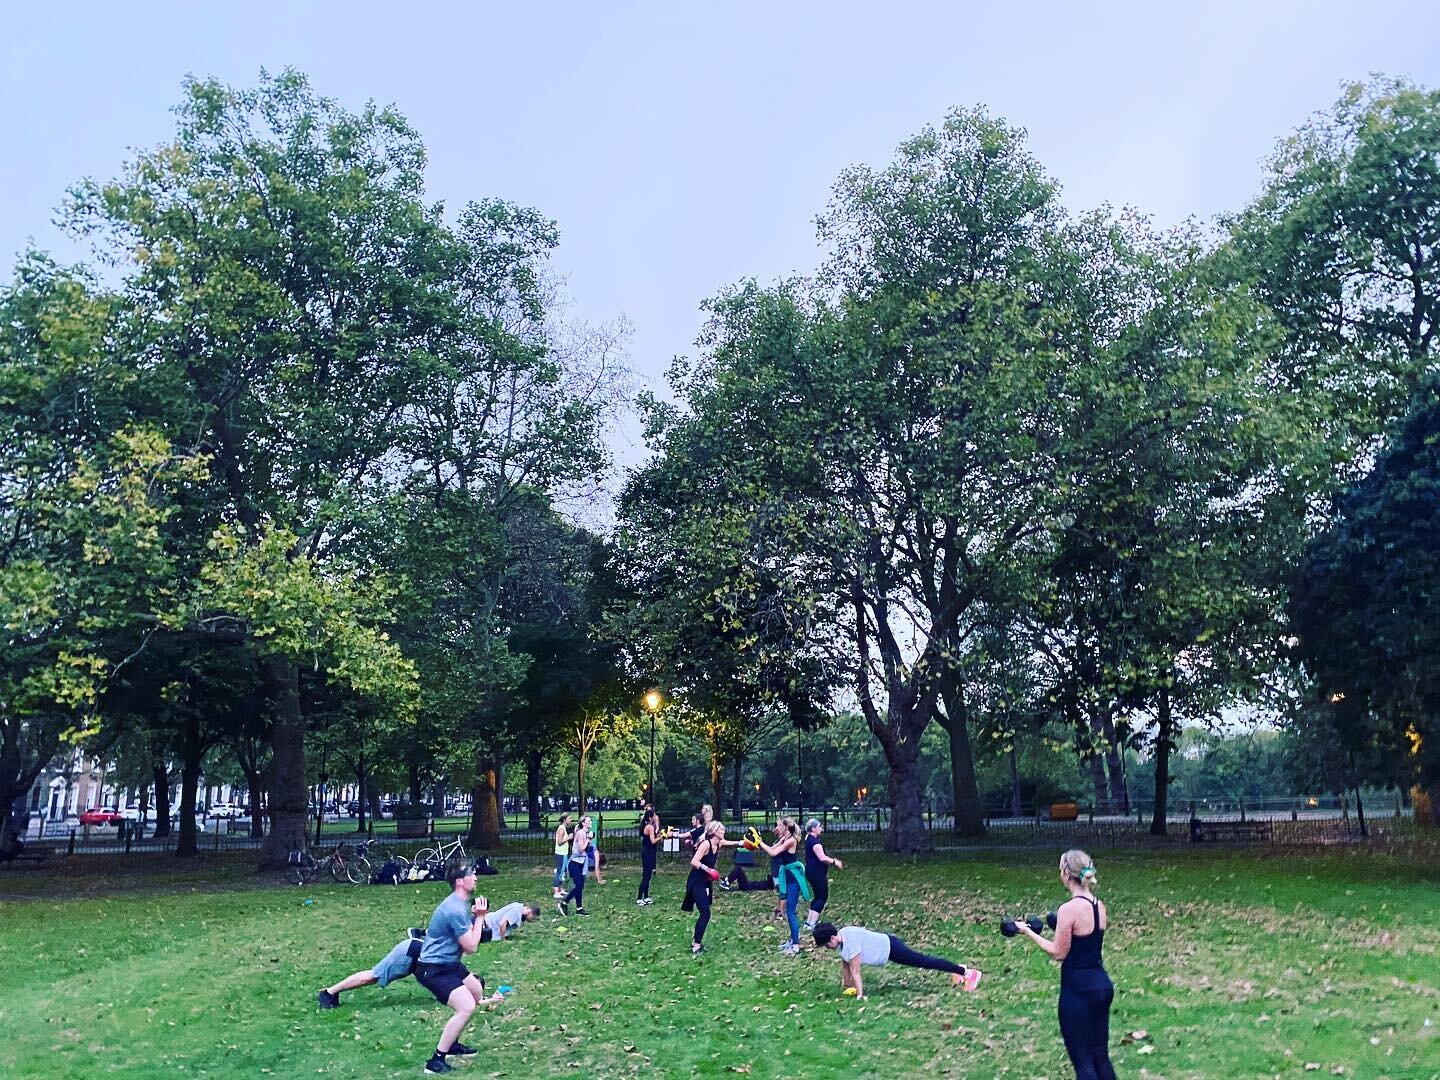 Thursday session 🙌
.
.
.
.
.
.
.
.
.
.

 #bootcamp #islington #highburyfields #exercise #fitness #fitnessclass #outdoorexercise #strong #burpees #pressup #situps #coreworkout #fit #fitfam #squats #lunges #london #run #running #pt #fitnessclass #heal